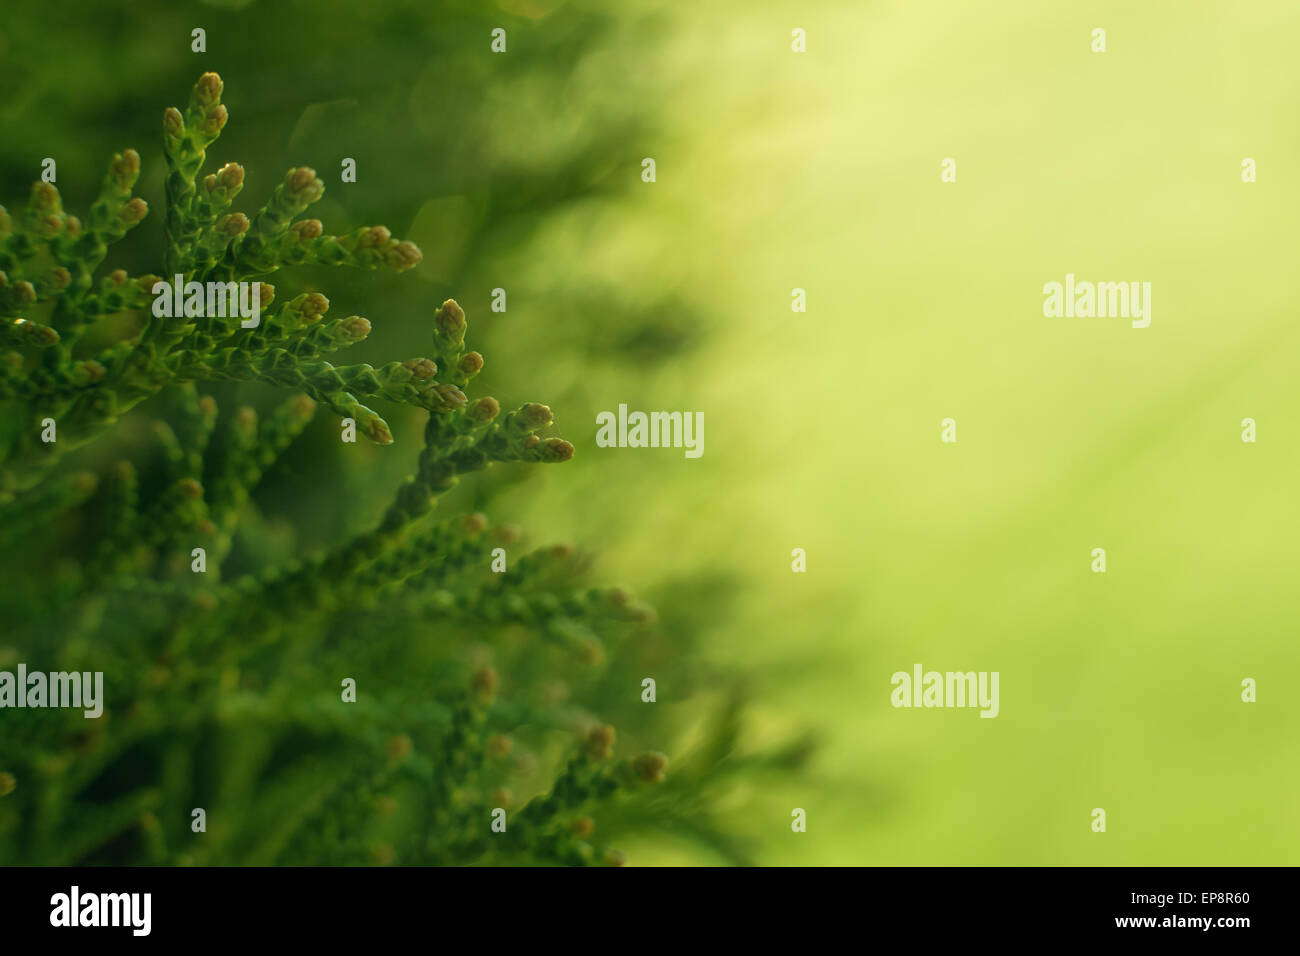 Green Hedge of Thuja Trees. Macro shot thuja branches in the sunlight. Copyspace for text. Stock Photo